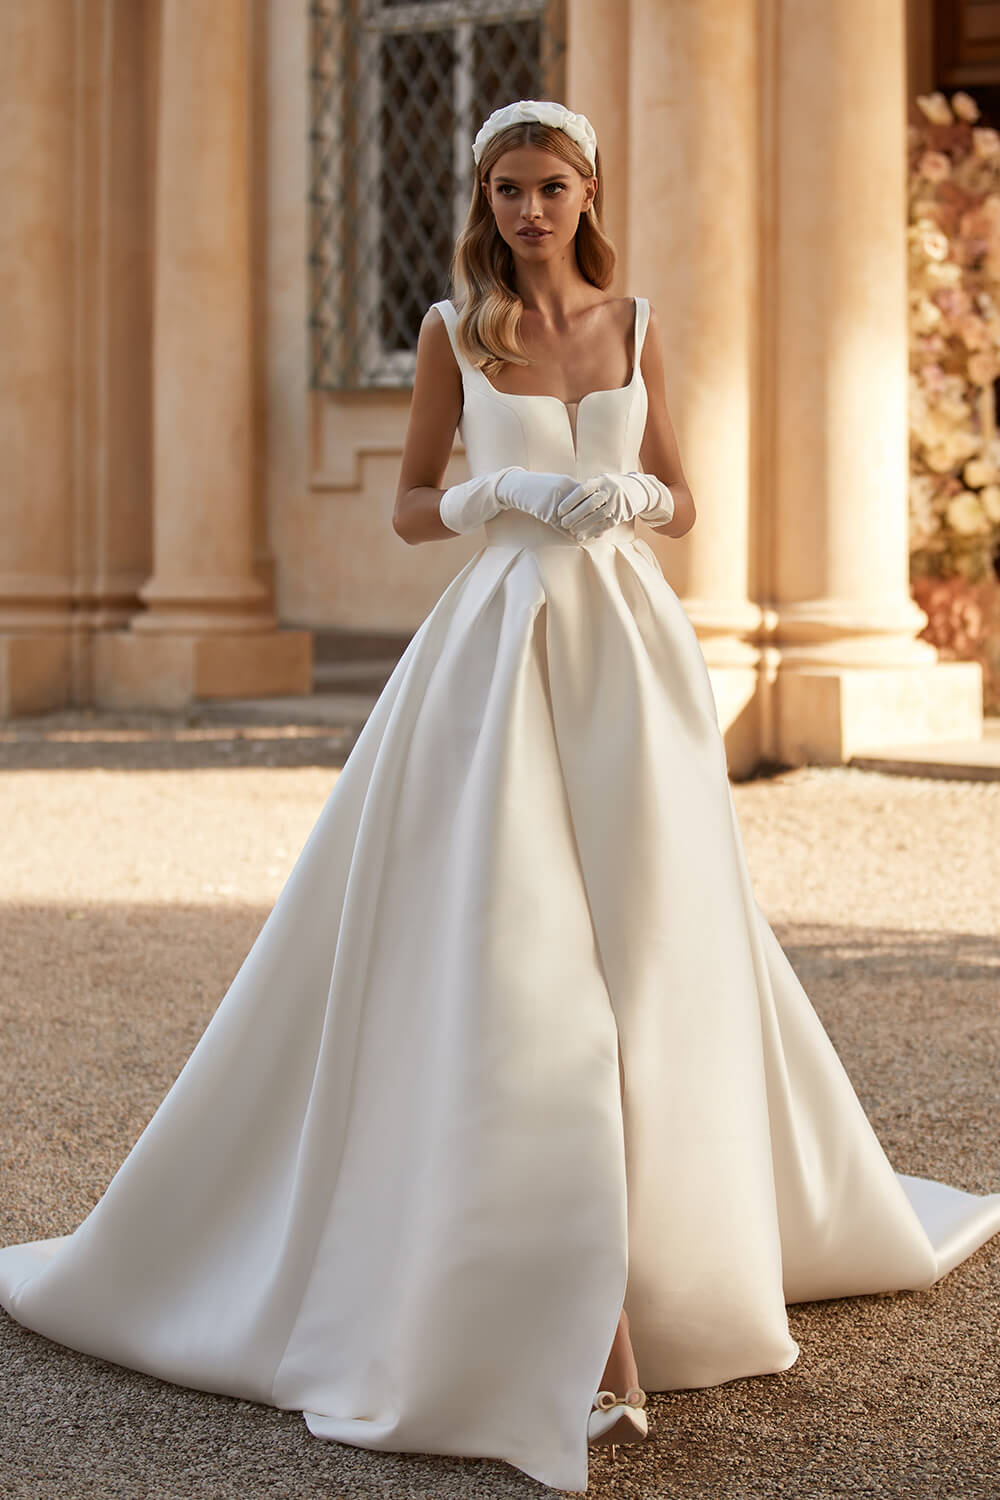 Wedding dress with gloves